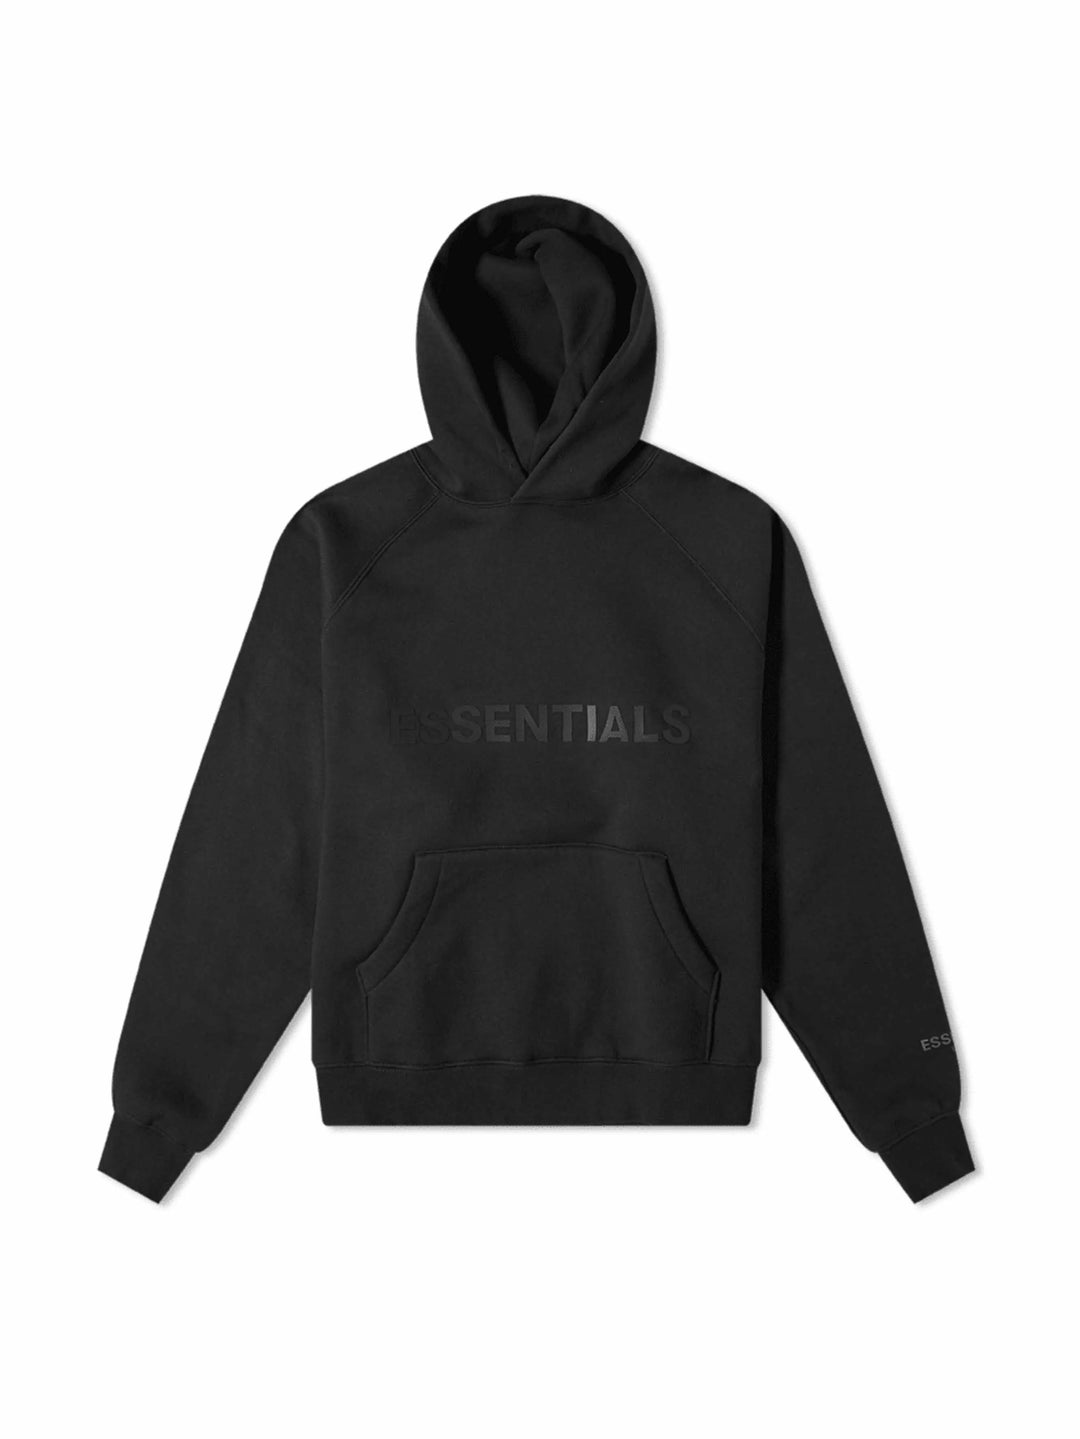 Fear of God Essentials Pullover Hoodie Applique Logo Dark Slate/Stretch Limo/Black (SS20) in Auckland, New Zealand - Shop name